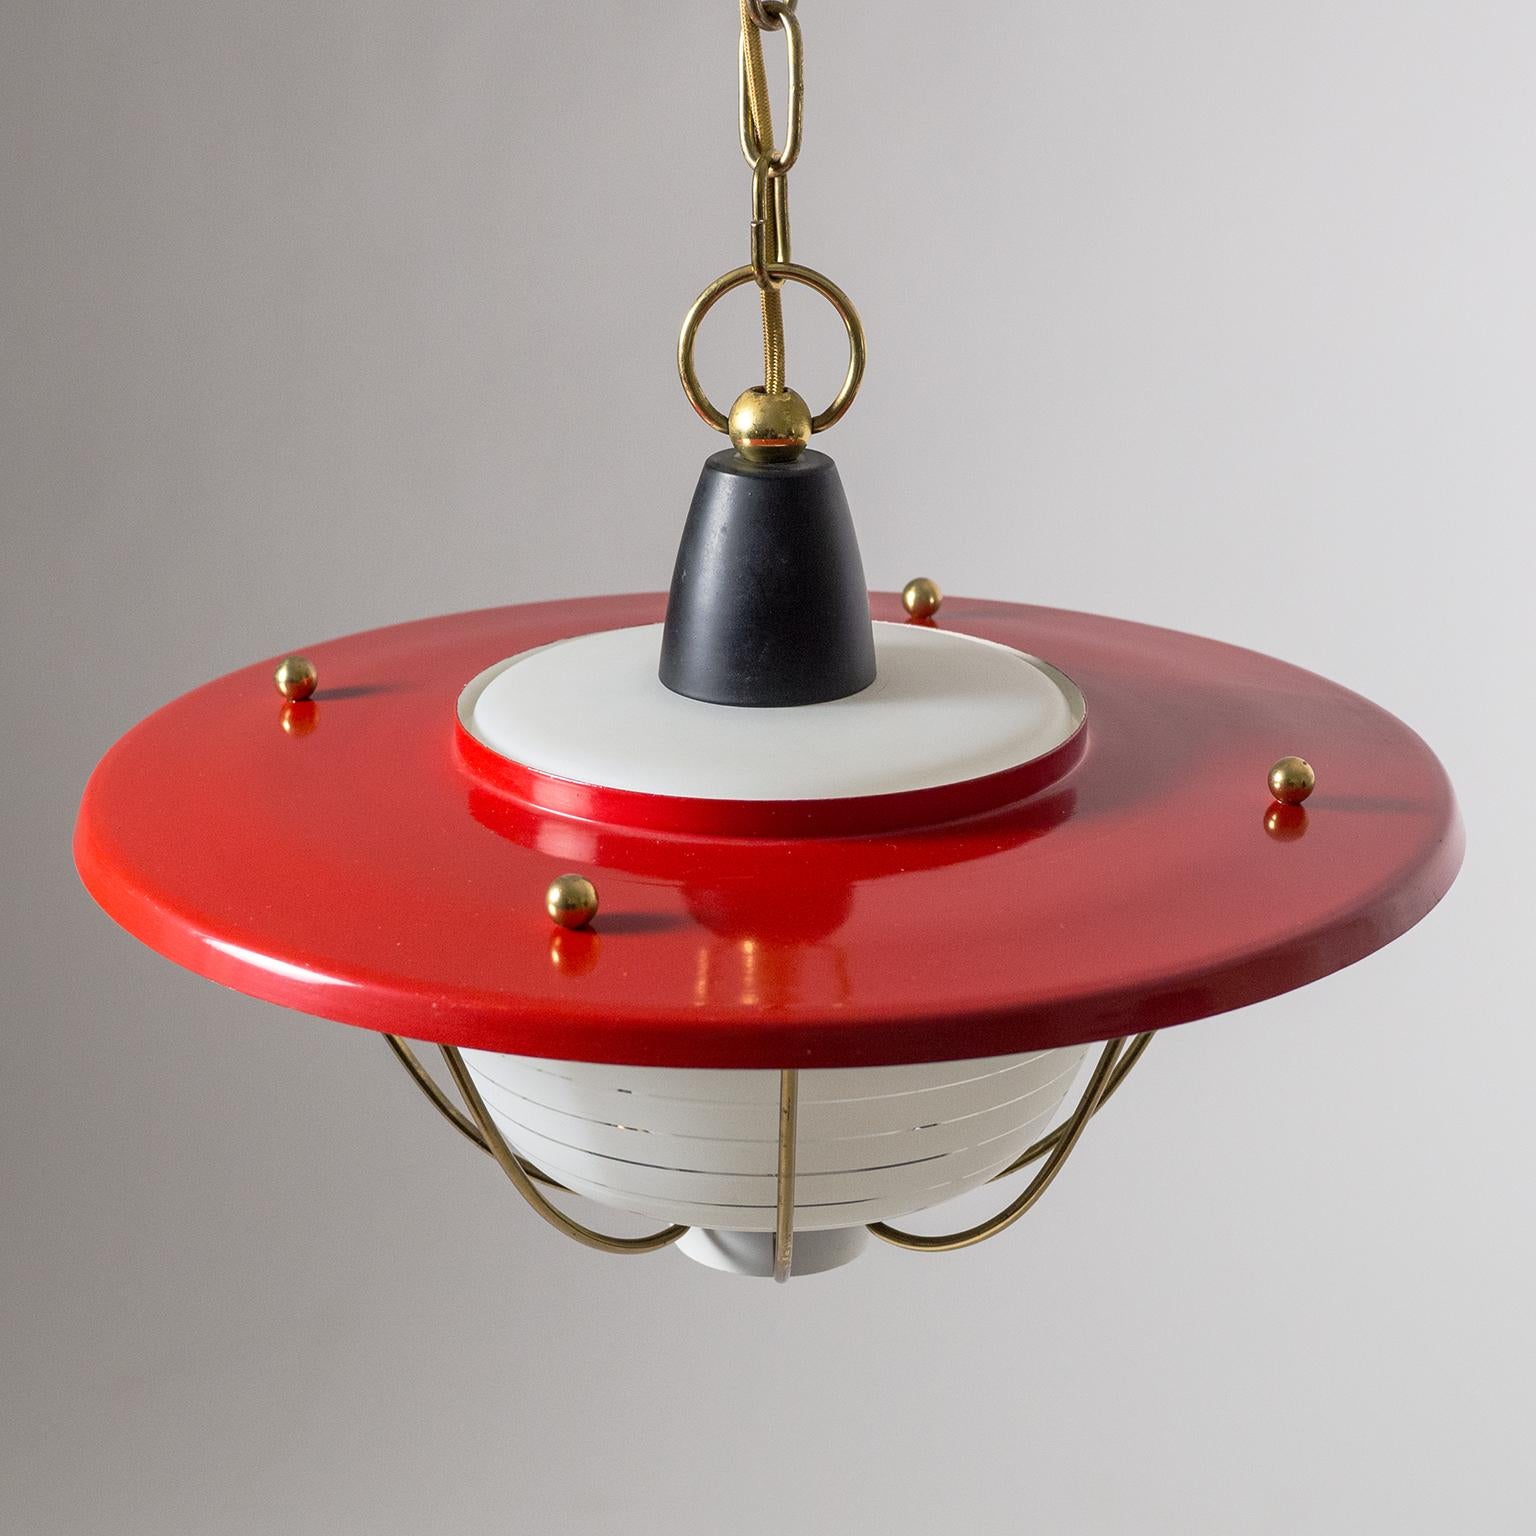 Mid-20th Century French Lantern, circa 1960, Striped Glass, Brass and Red Shade